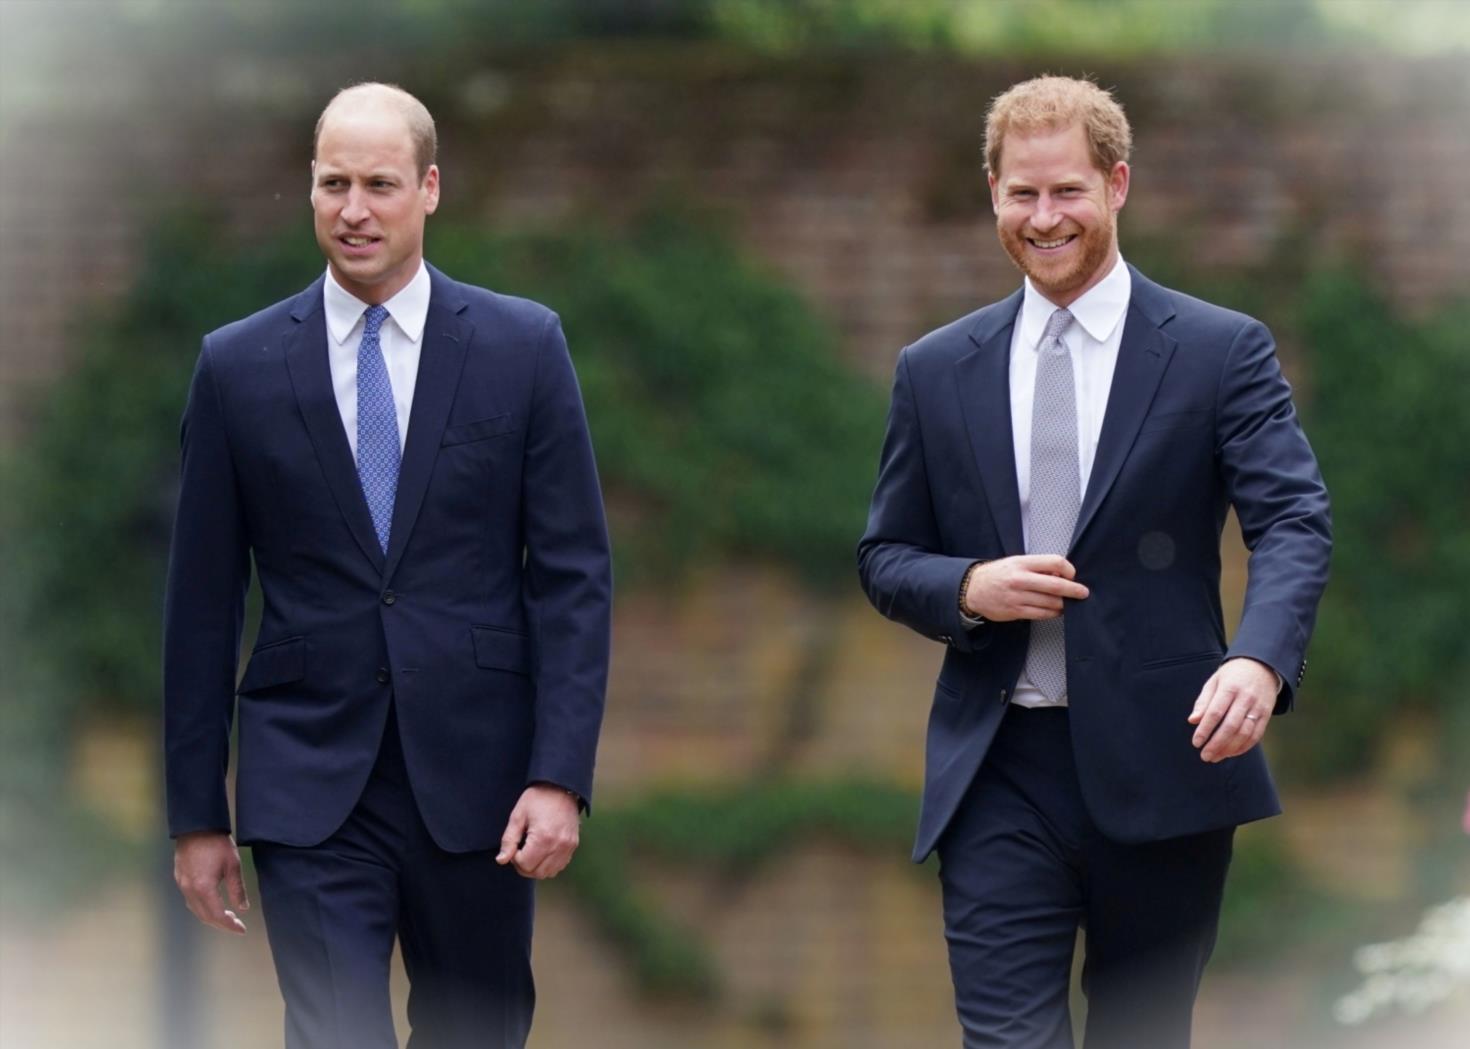 Prince Harry Allowed to Serve in War While Prince William Denied DueDySXbnDWZ 5